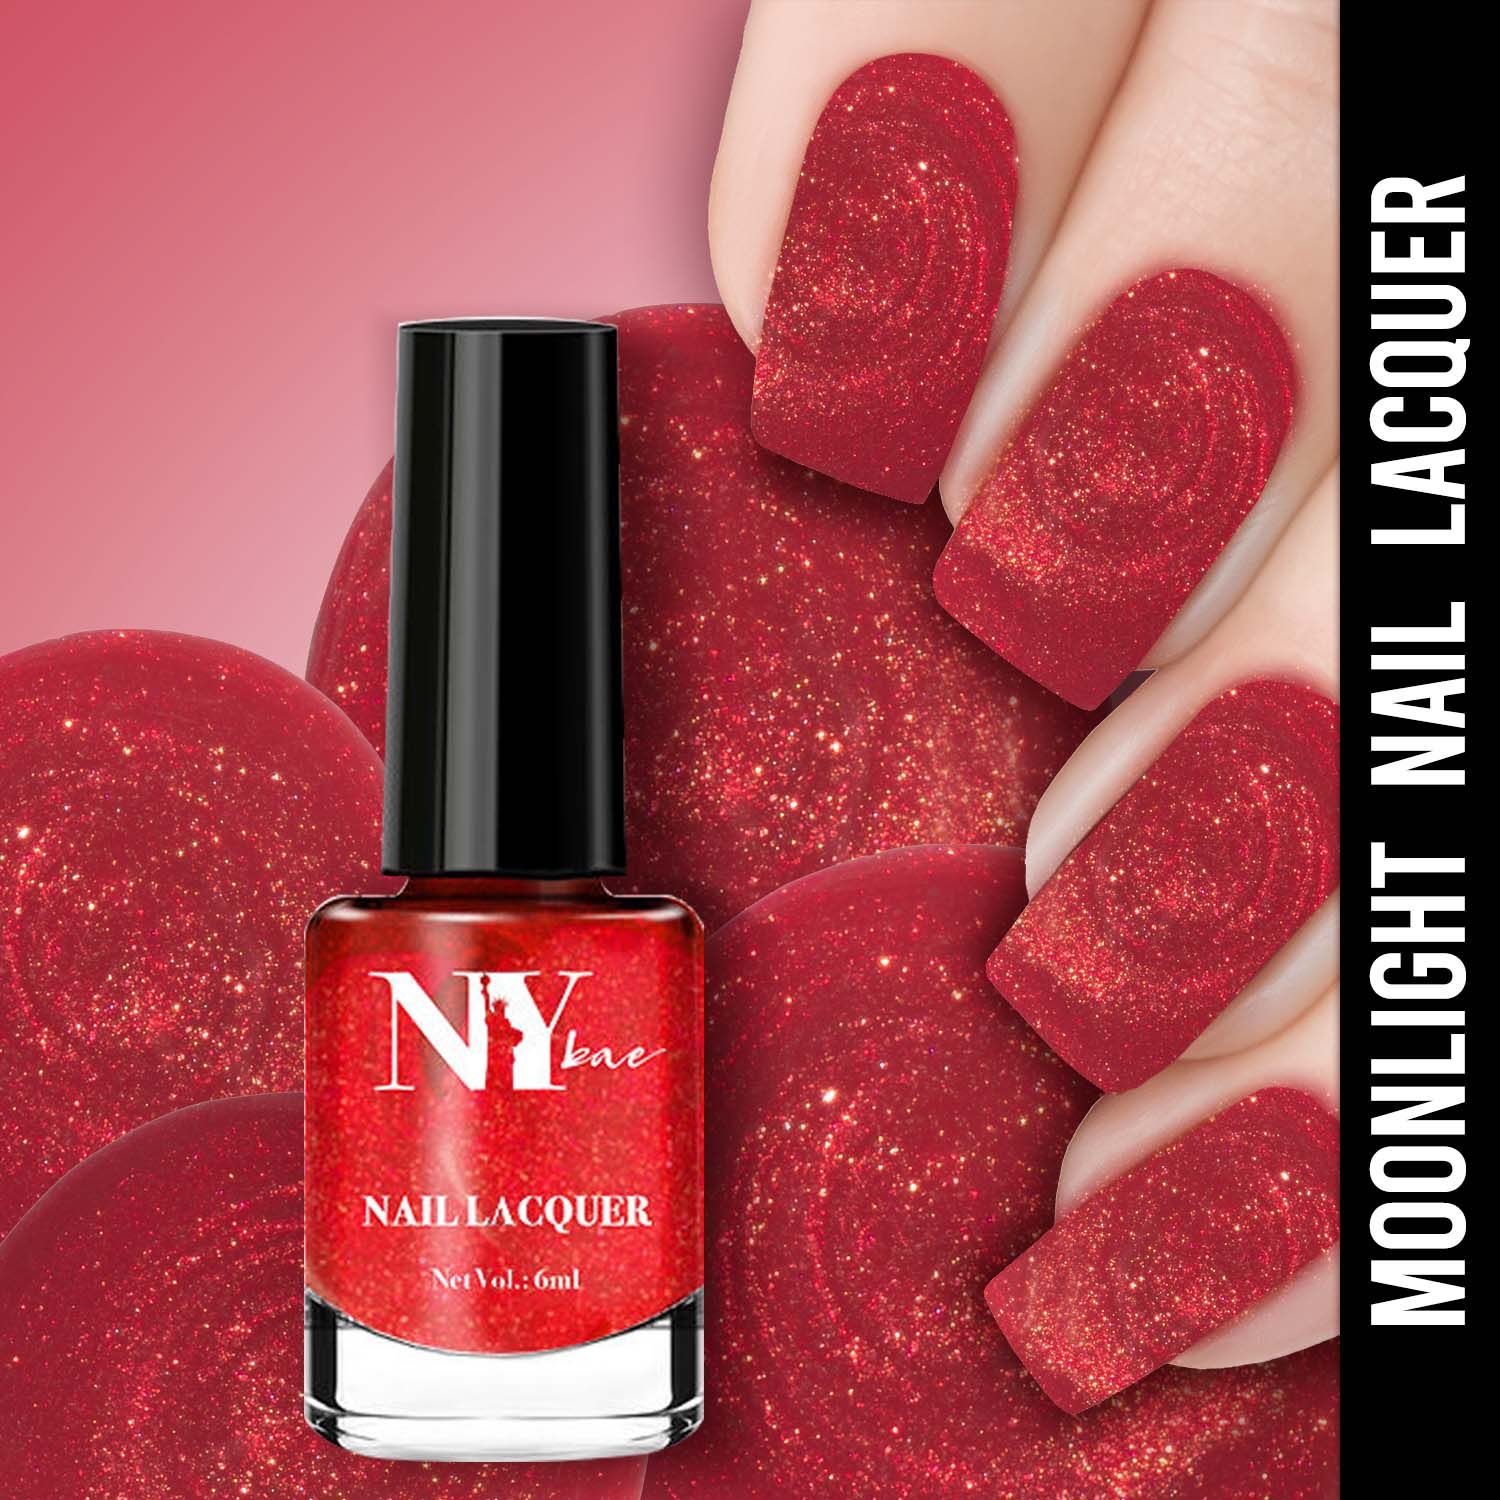 NY bae Nail Laquer Combo (Spicy Pink, Her Grace, Red Sugar Effect, Neon  Coral, Orange, Brown) Multicolor - Price in India, Buy NY bae Nail Laquer  Combo (Spicy Pink, Her Grace, Red